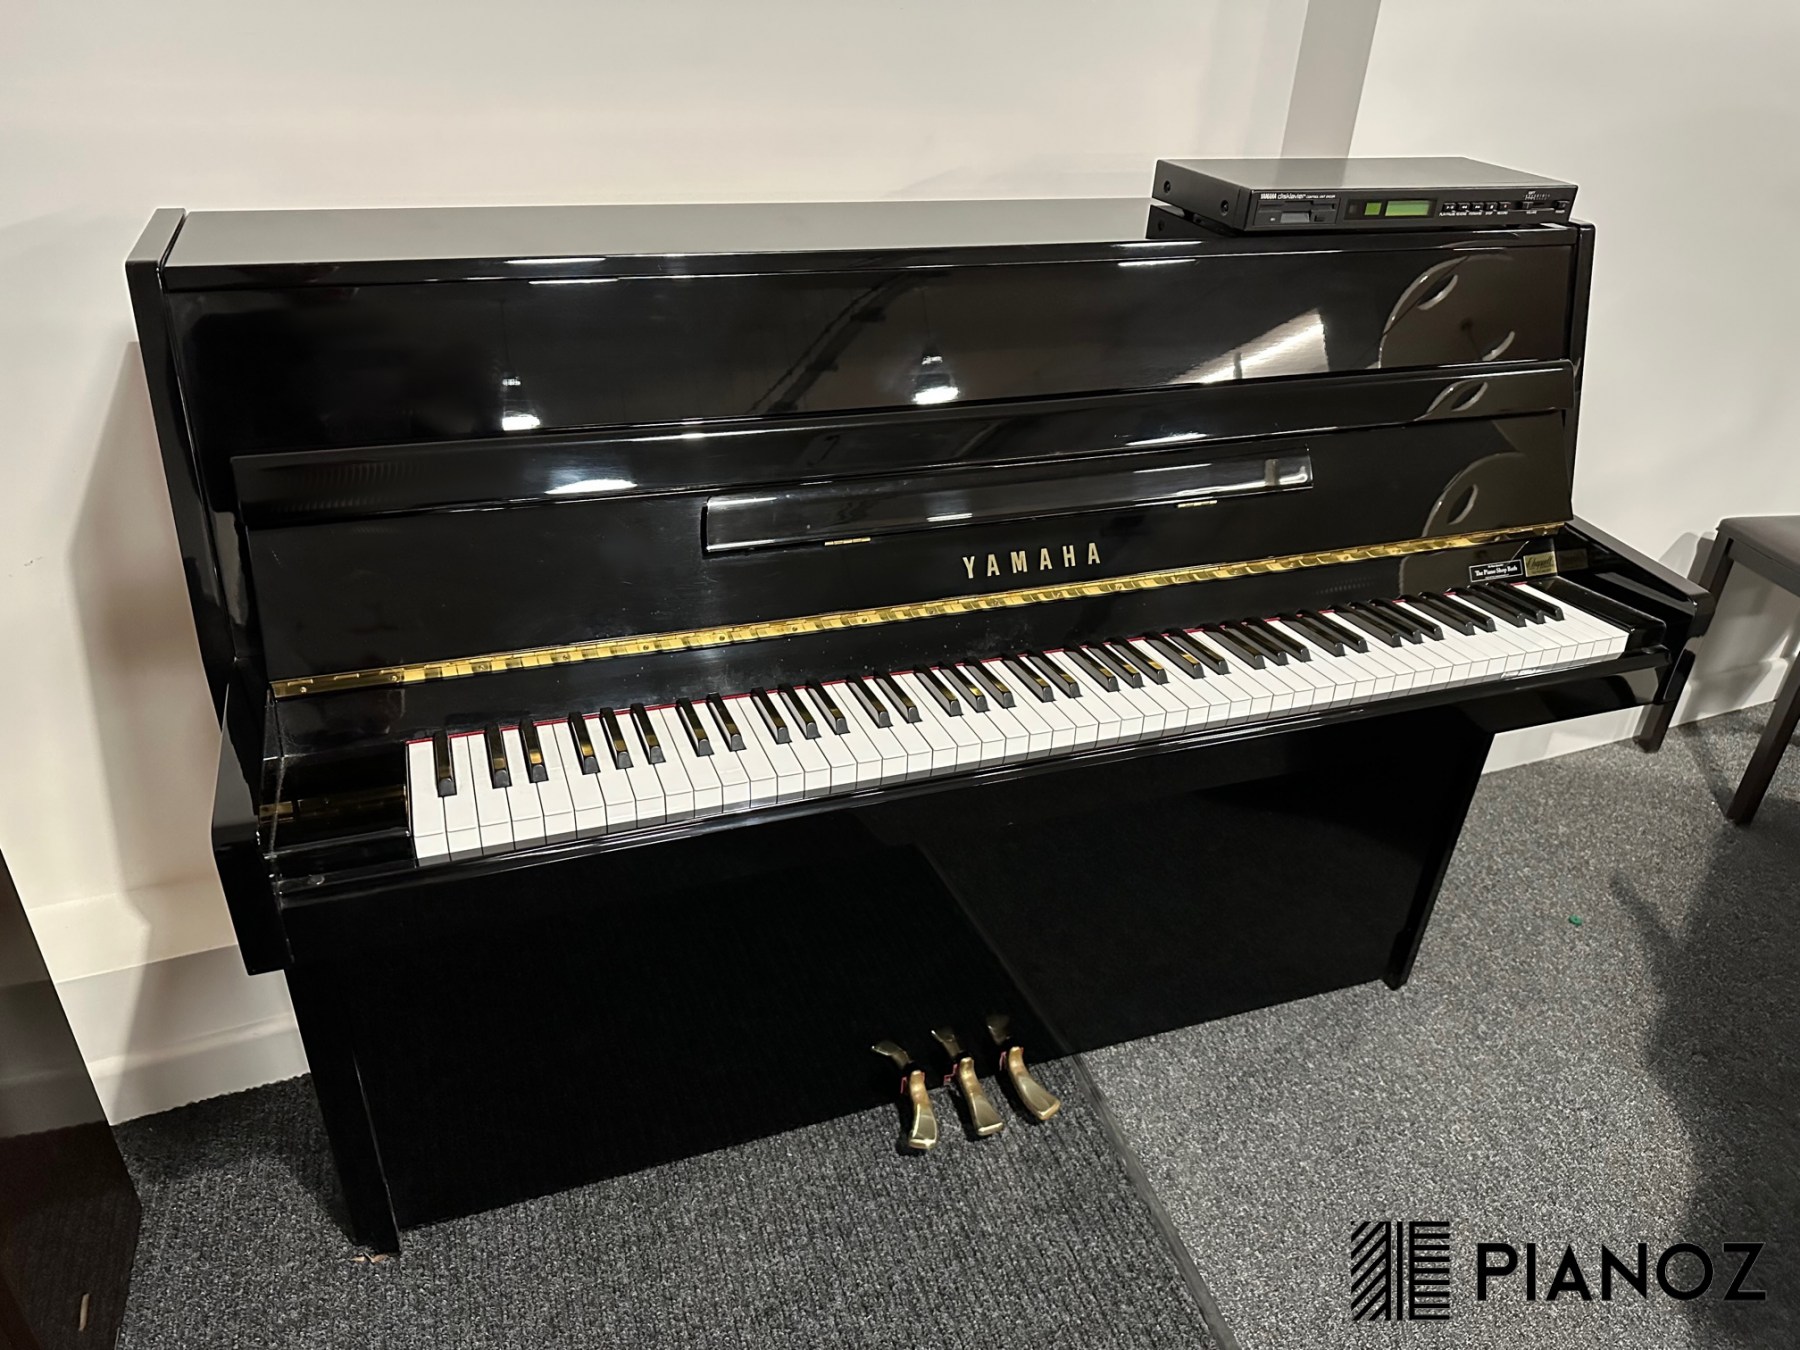 Yamaha Disklavier Self Playing Upright Piano piano for sale in UK